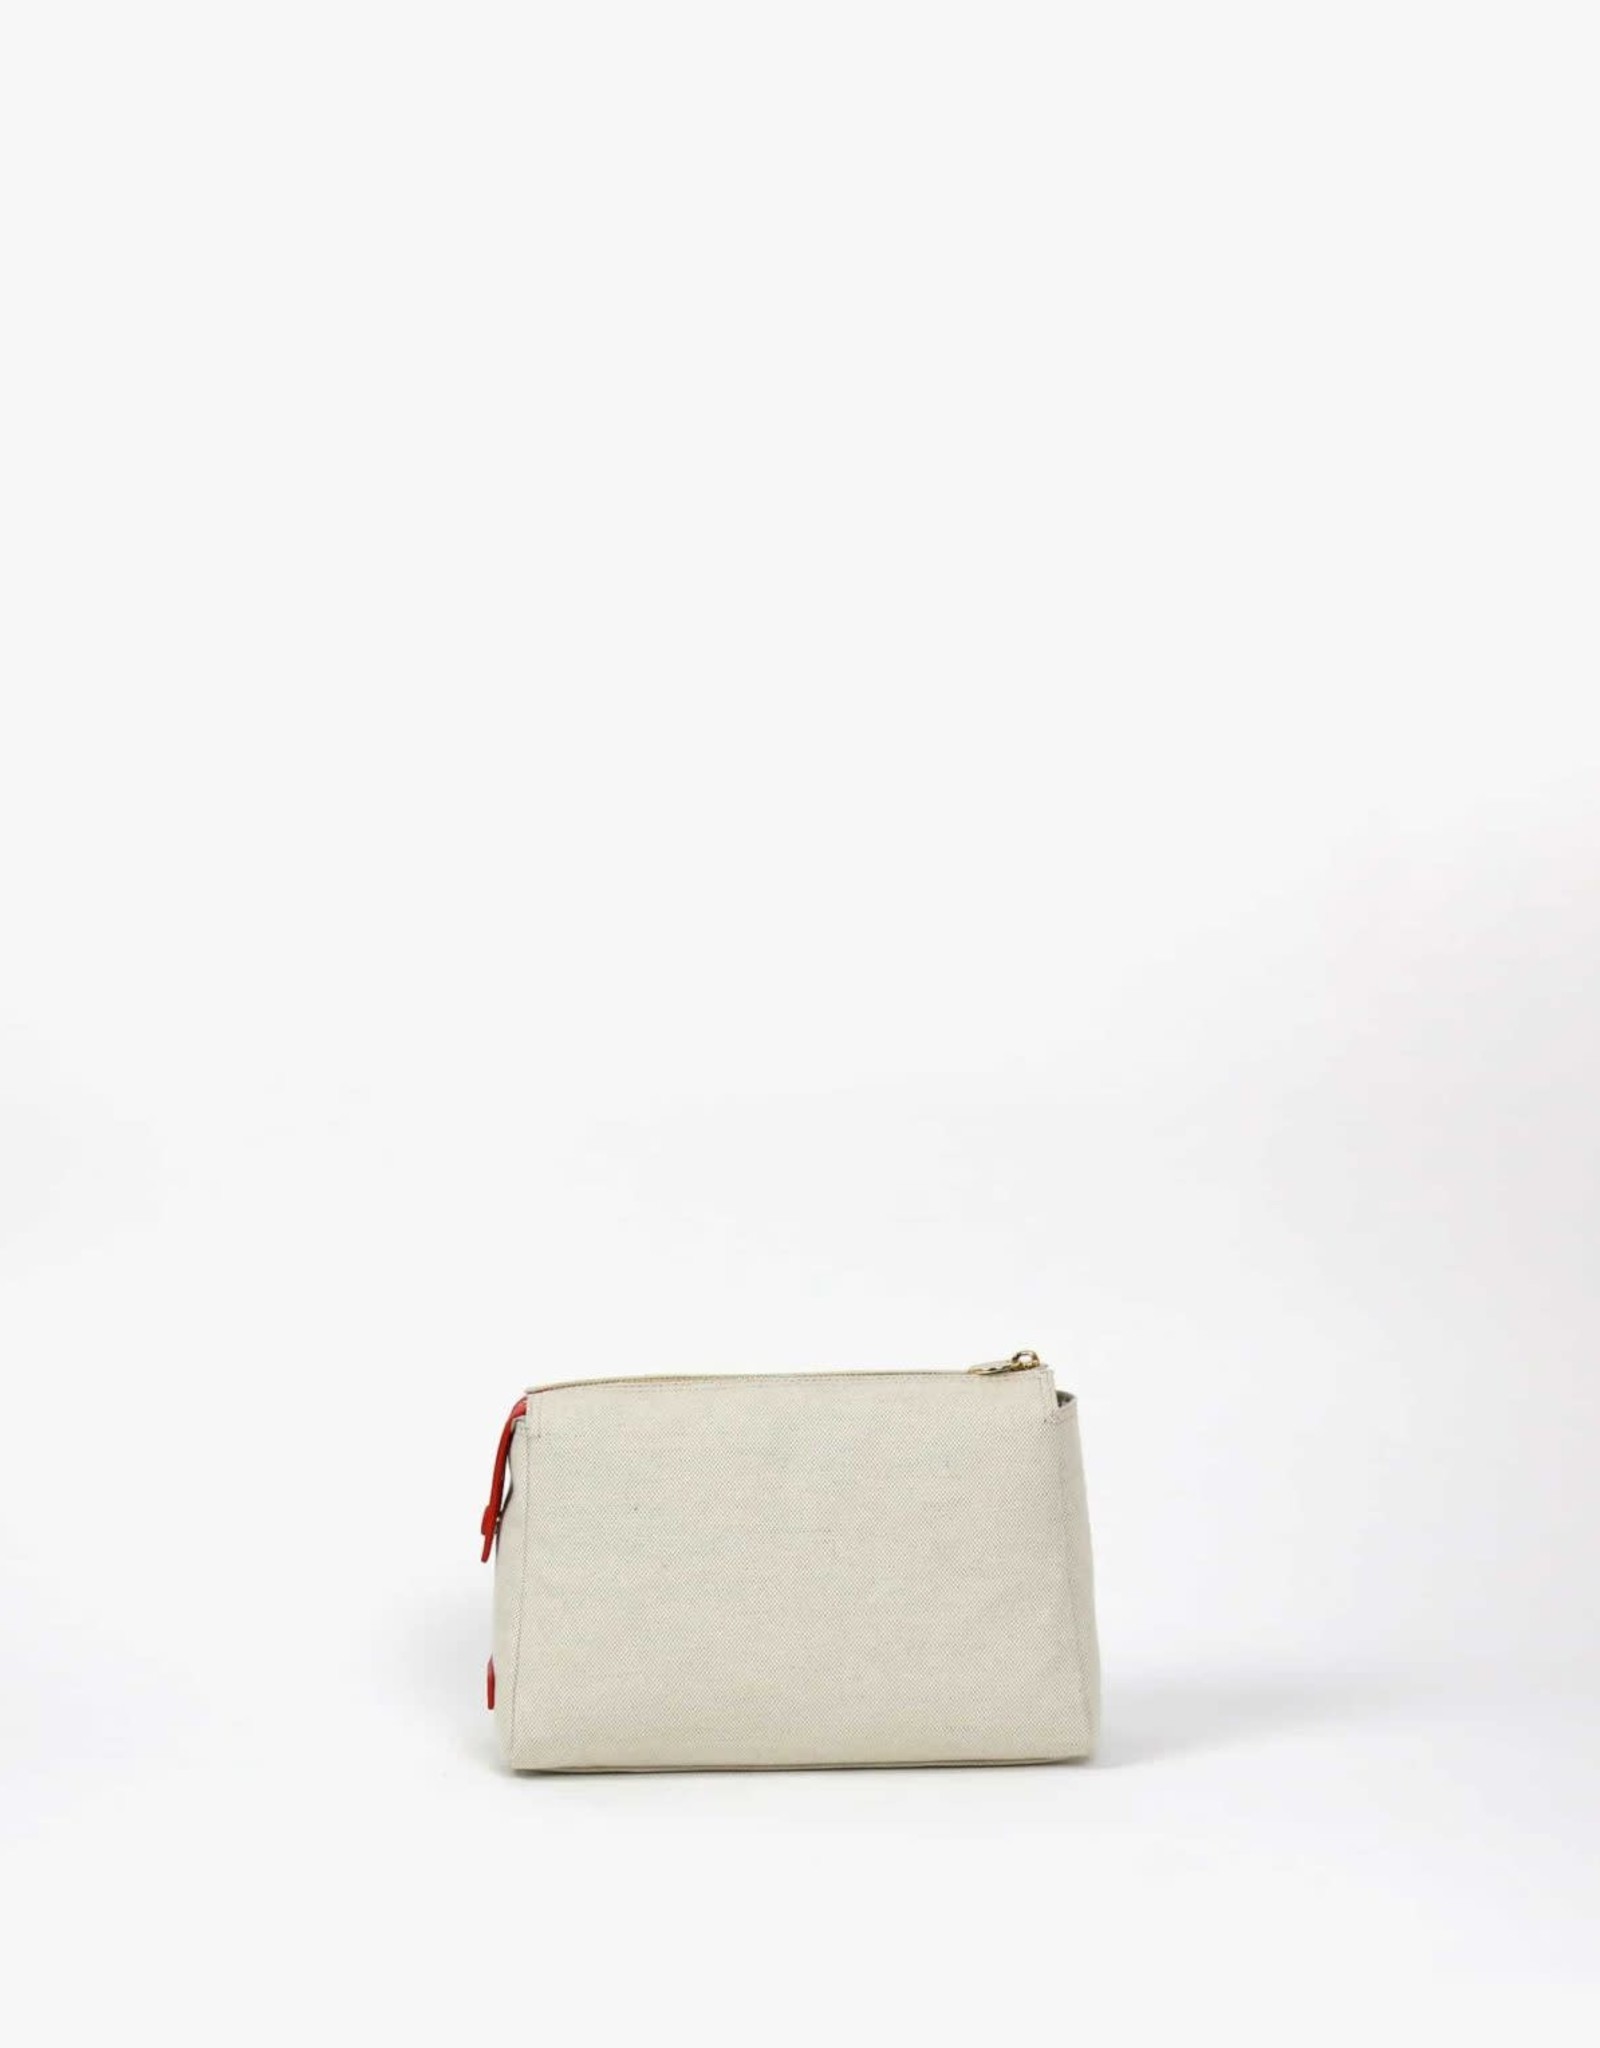 Neely & Chloe Canvas Pouch